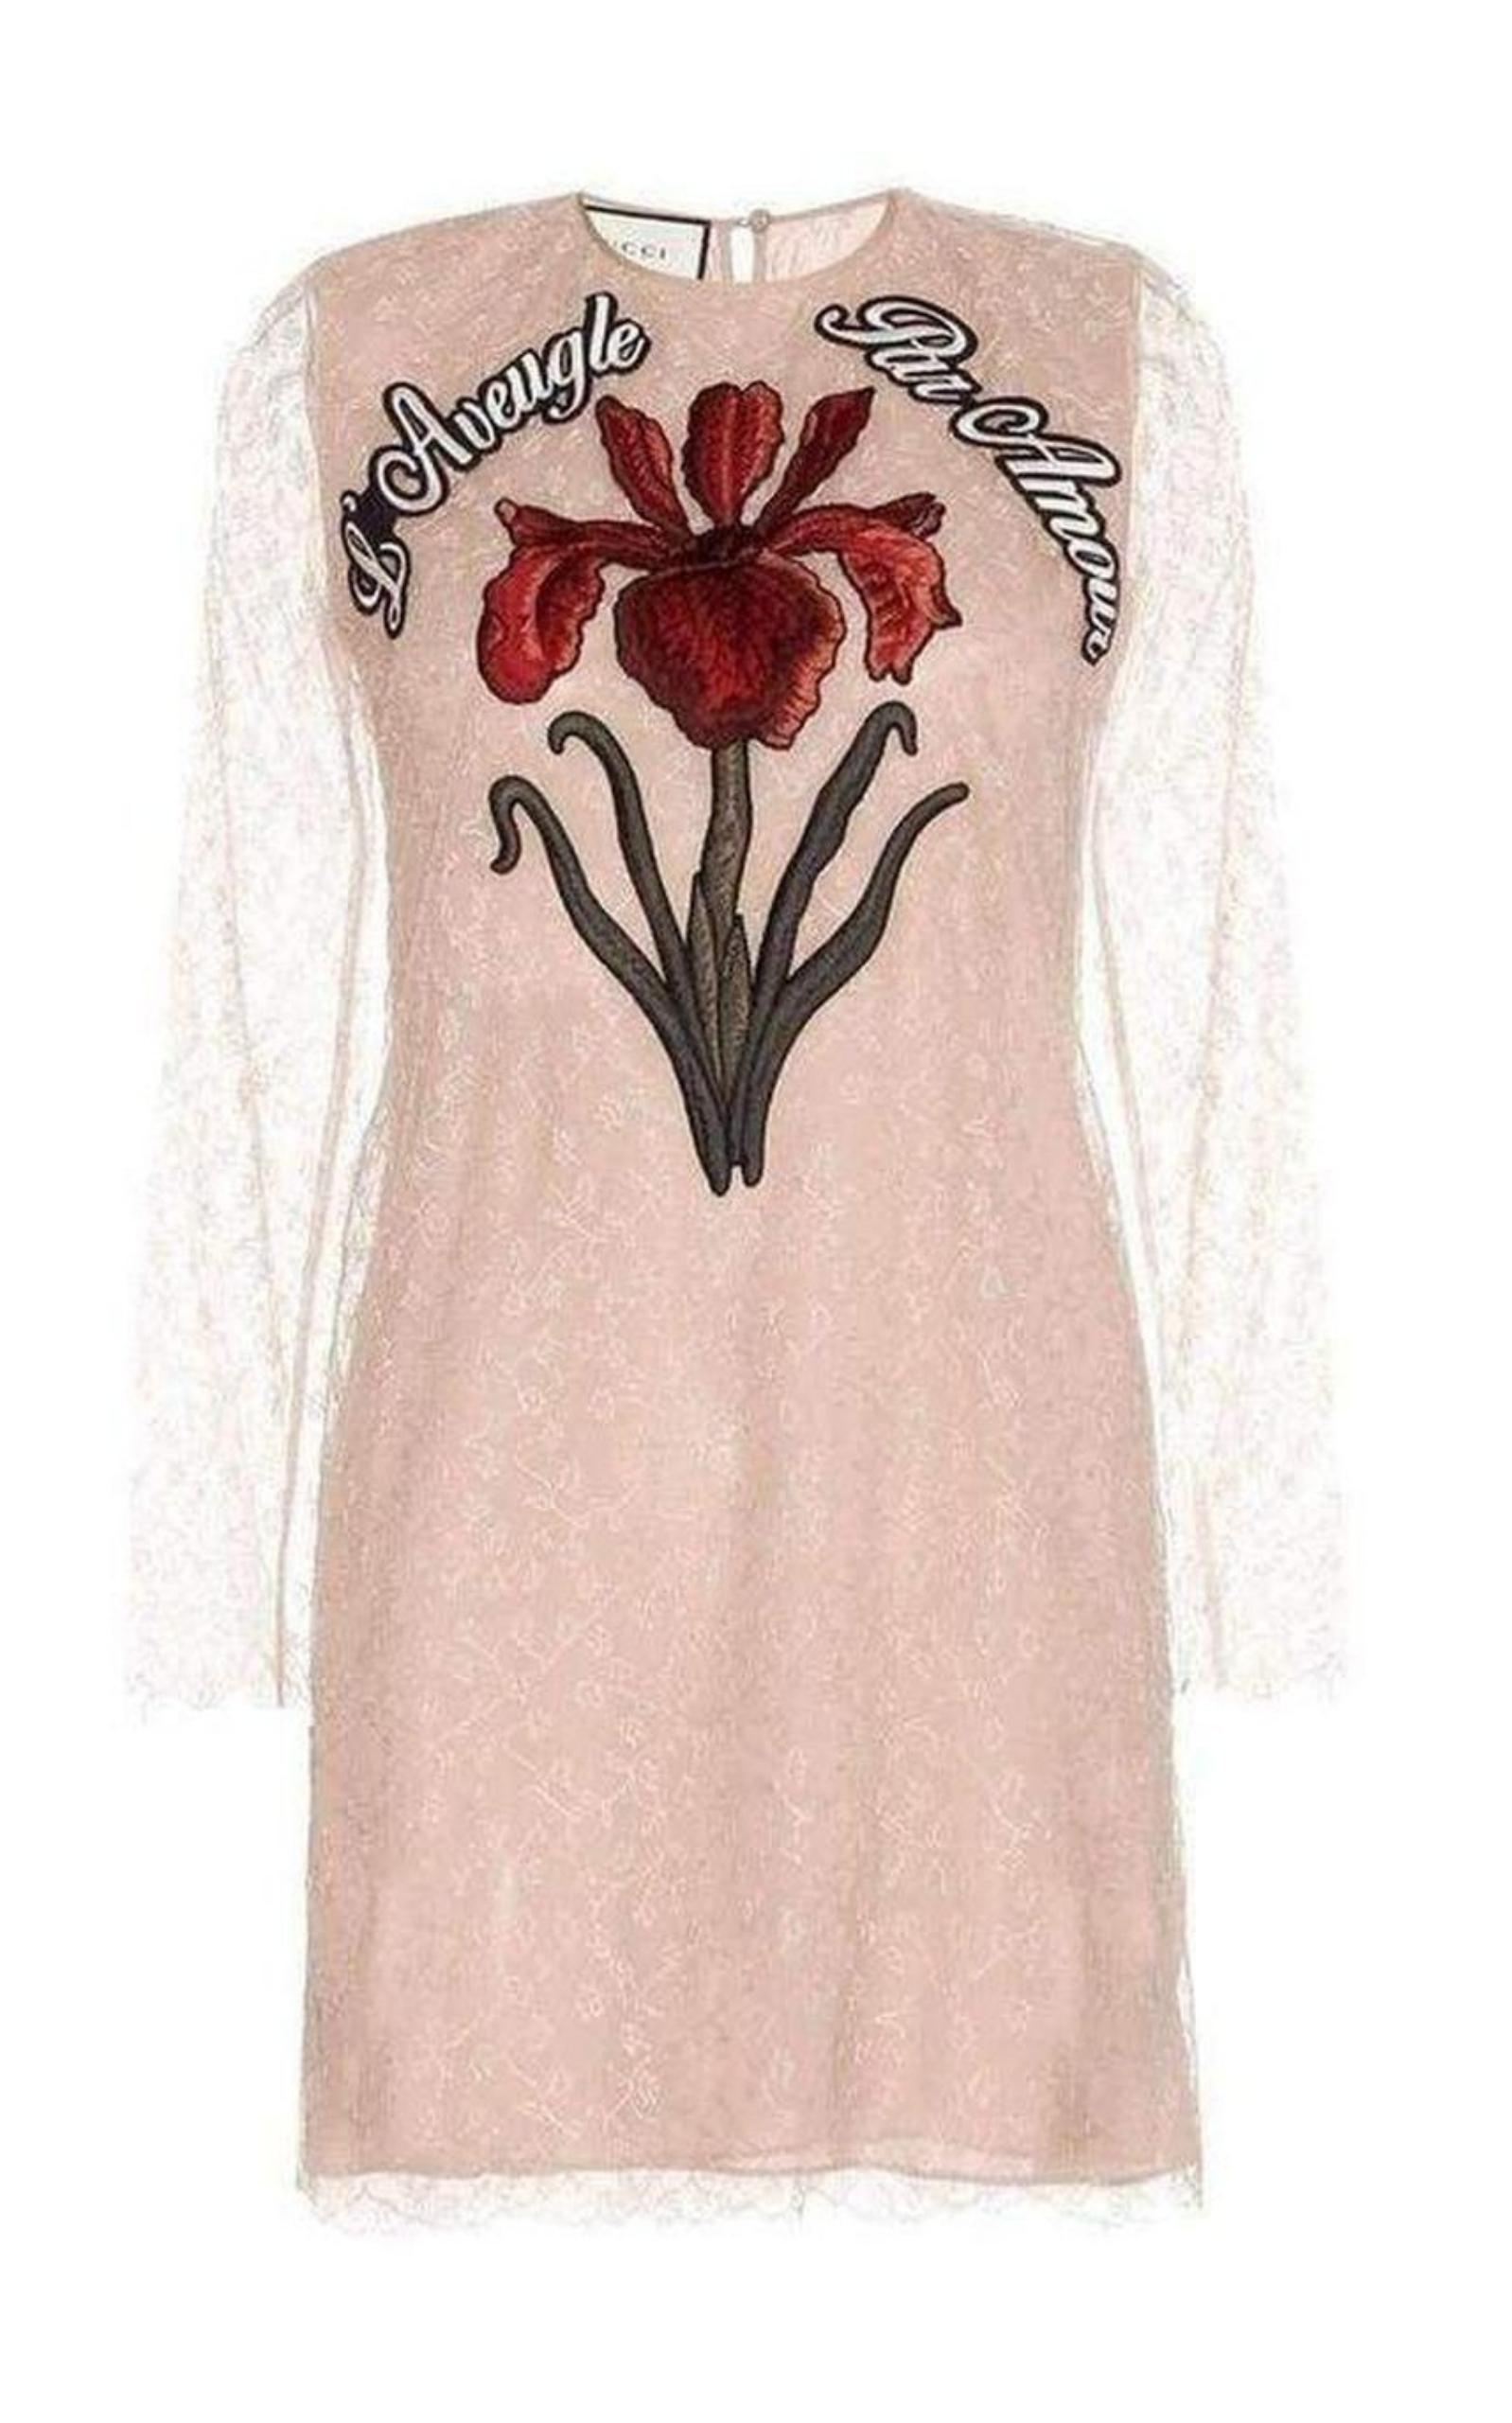  GucciNude Lace Embroidered Dress - Runway Catalog